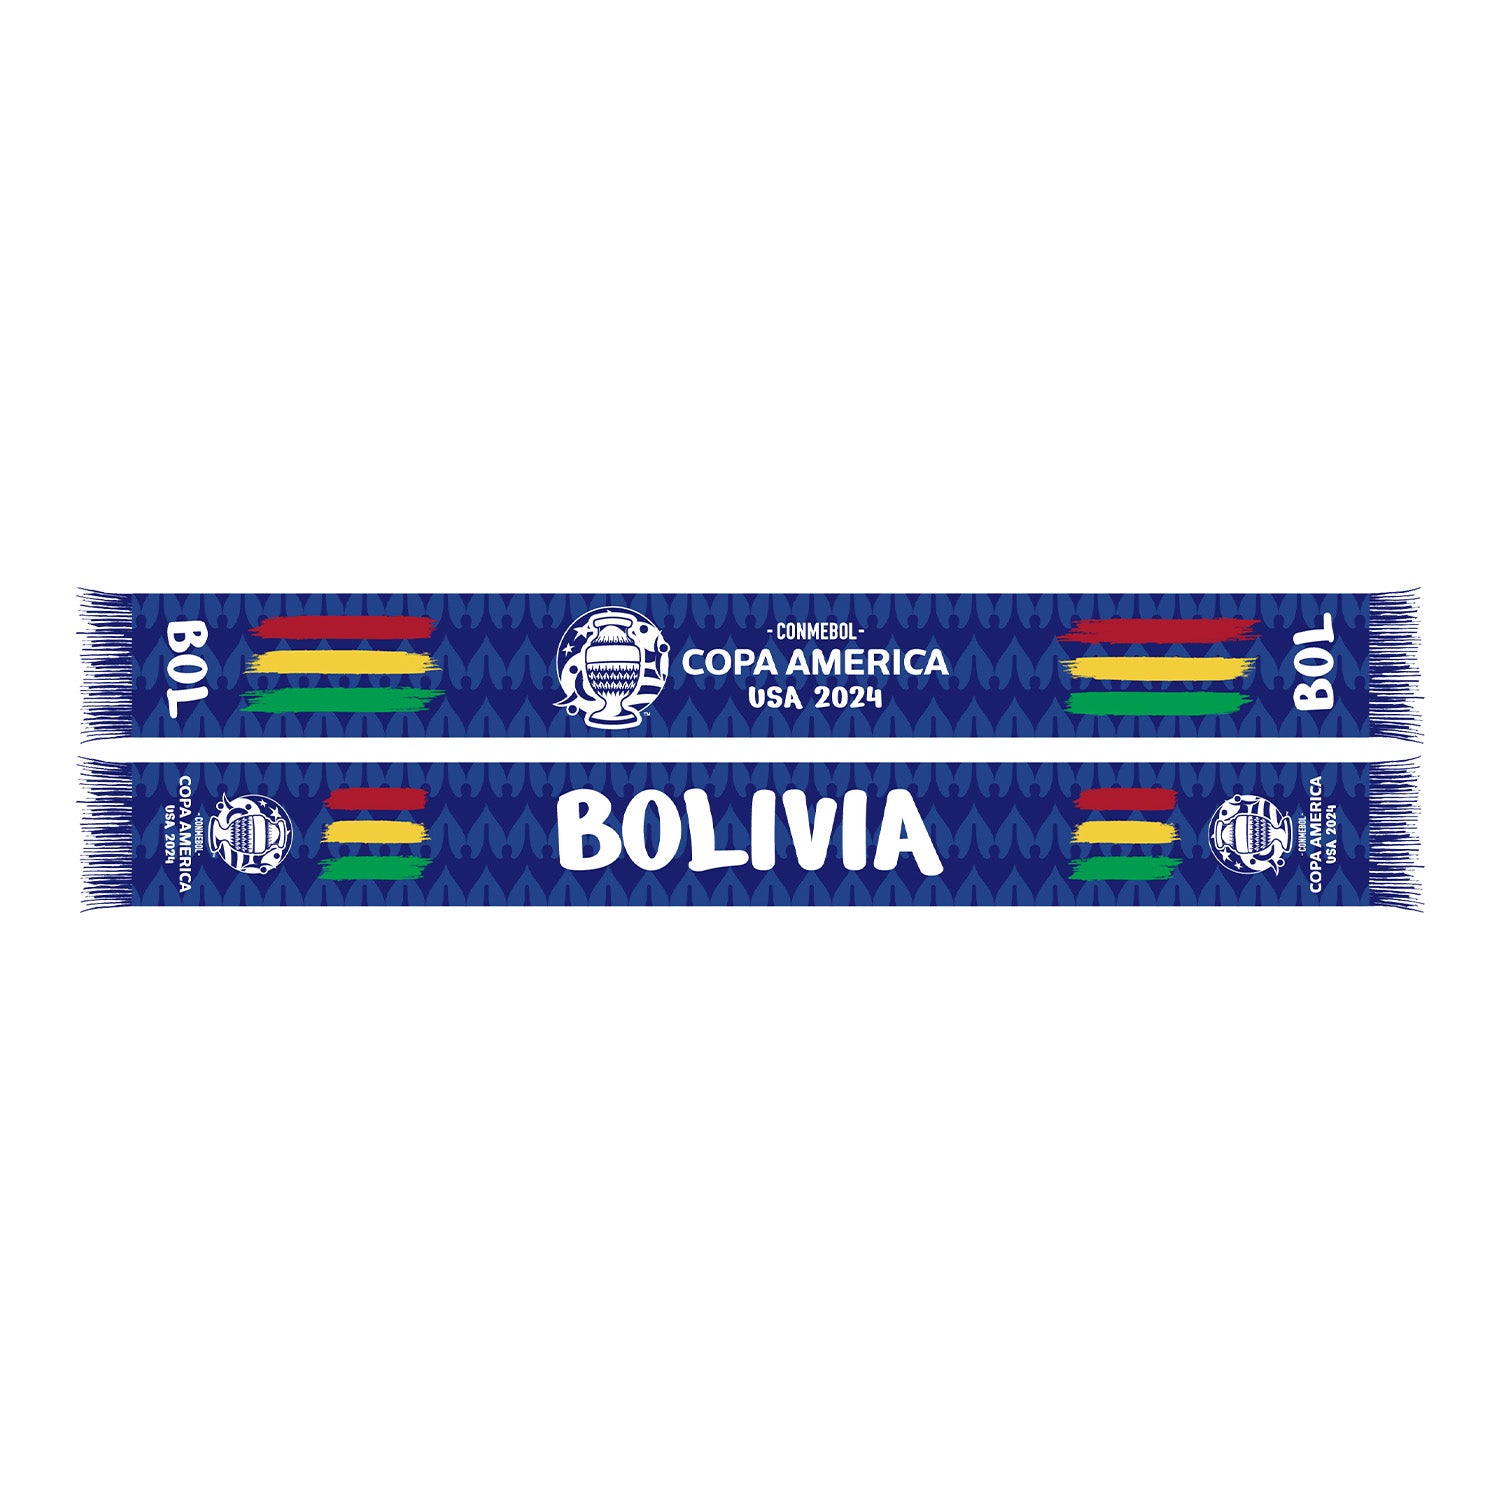 Bolivia COPA America Scarf - Front and Back View